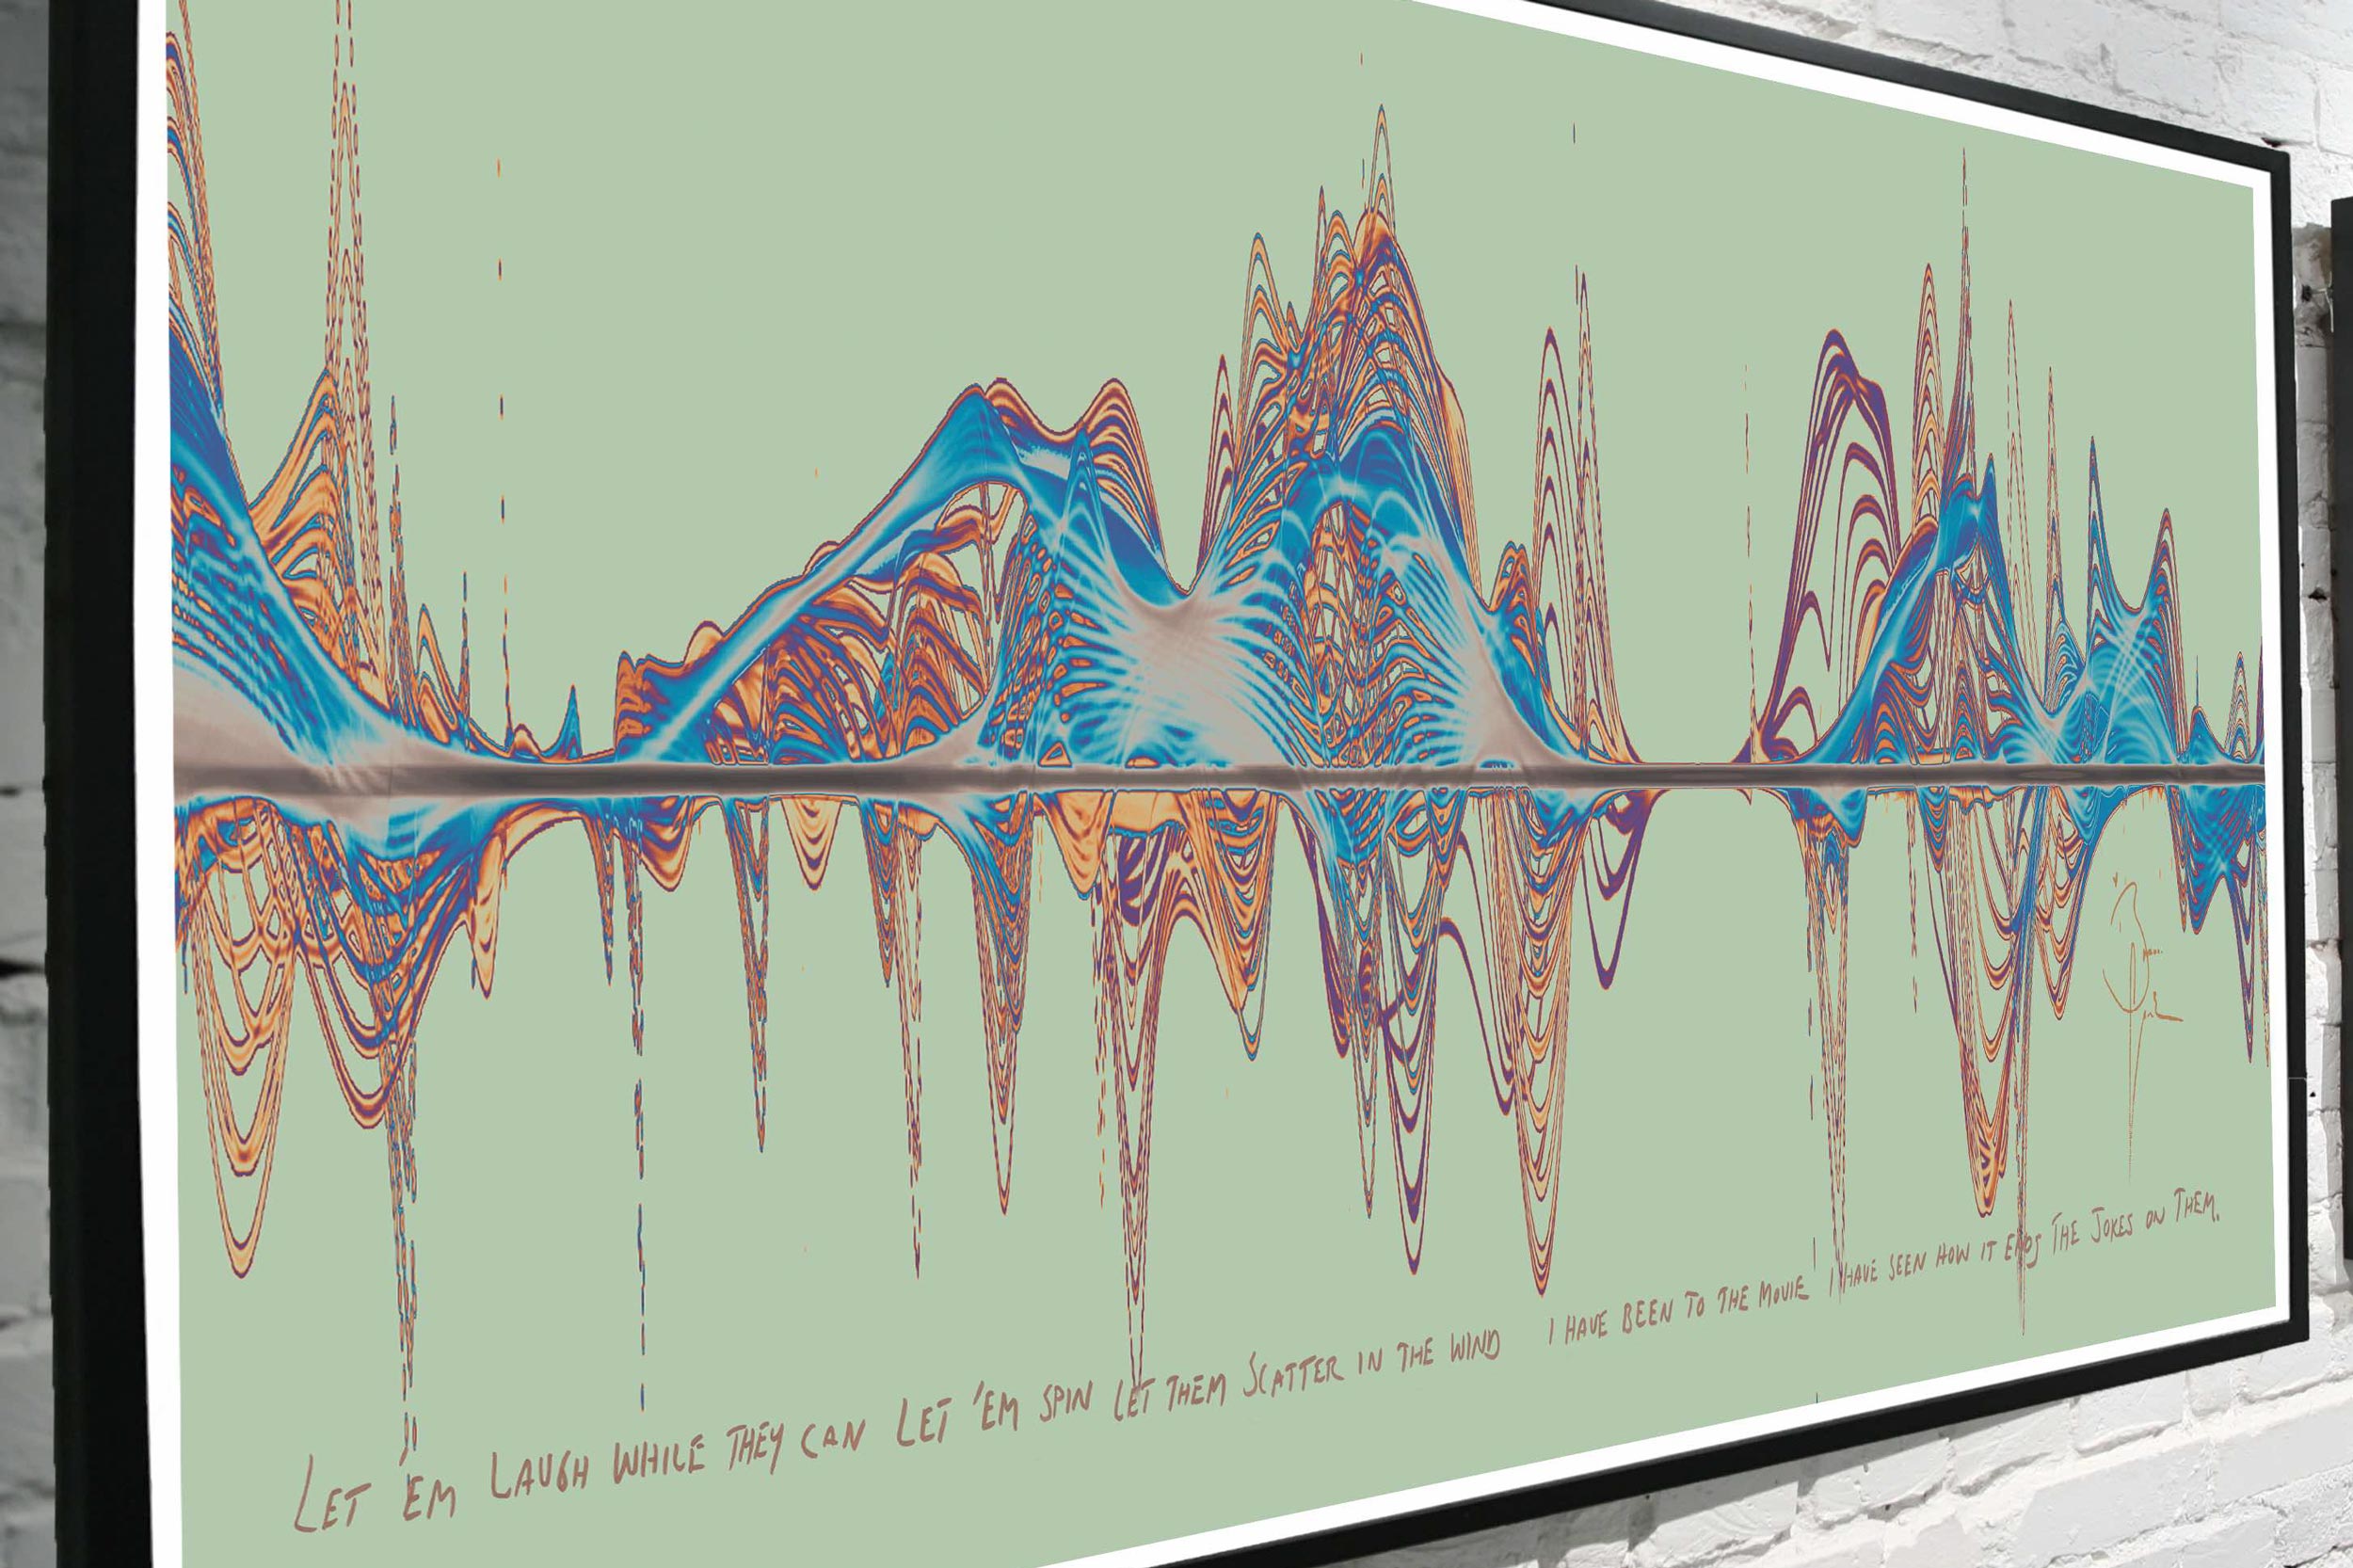 Painting of multicolored sound waves with lyrics